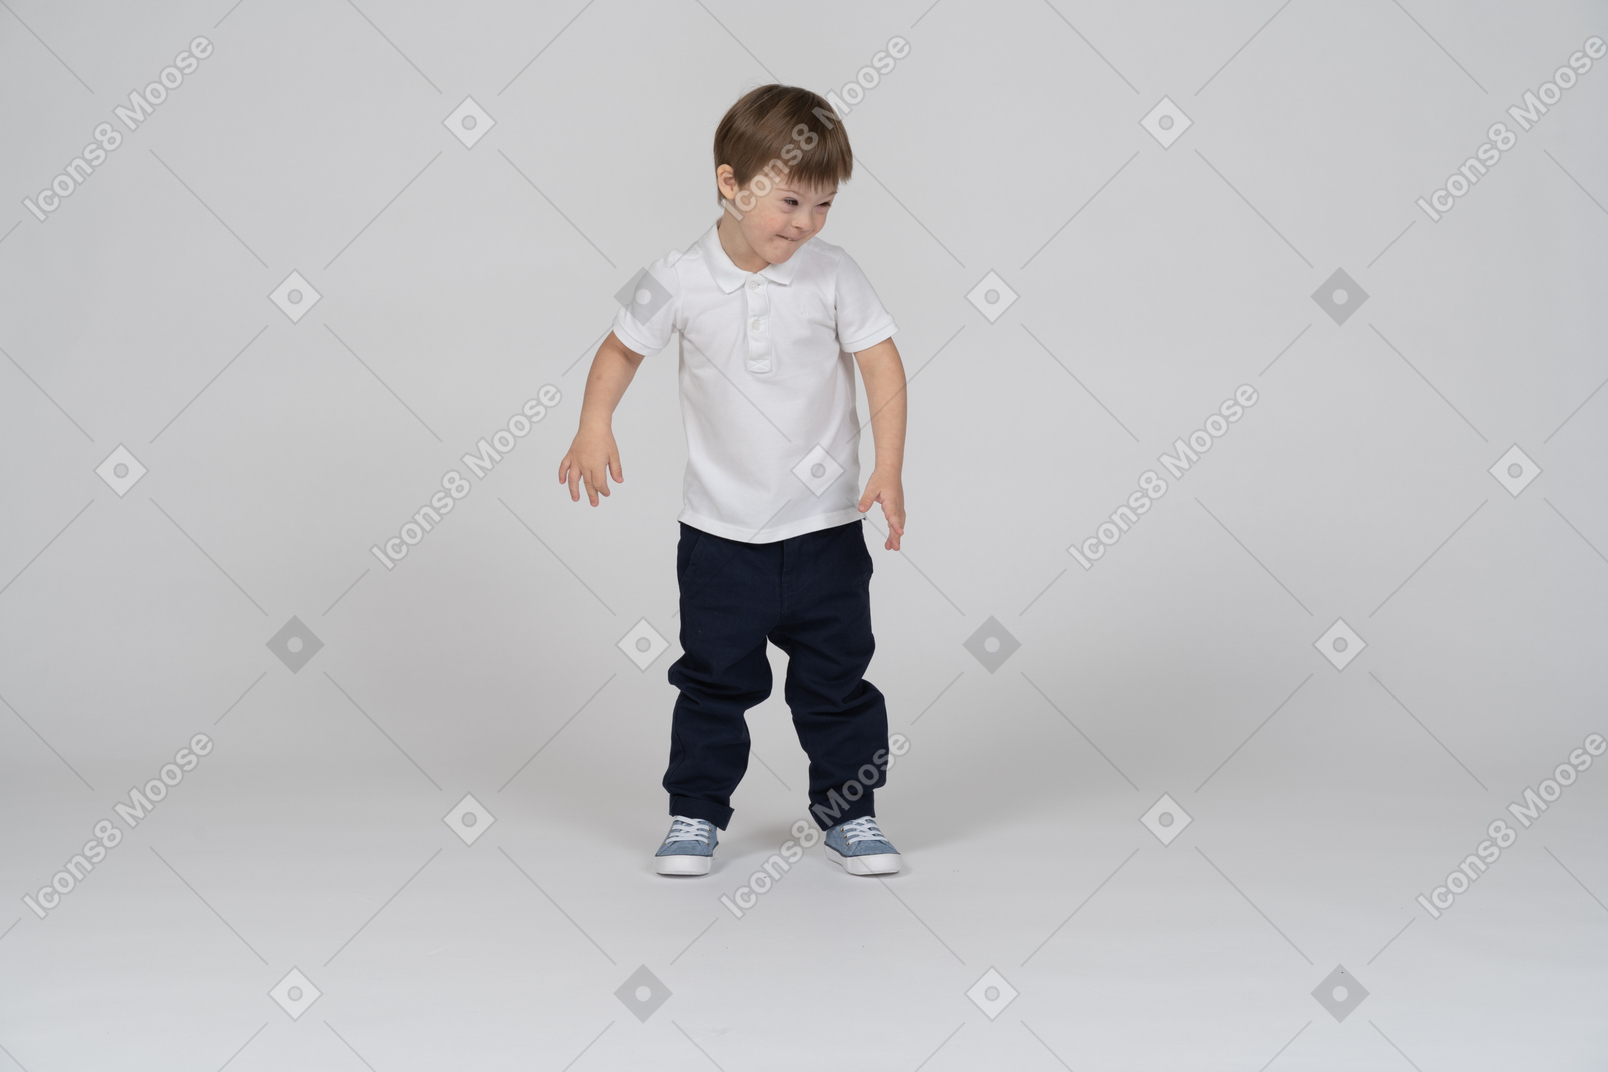 Smiling little boy standing and looking aside